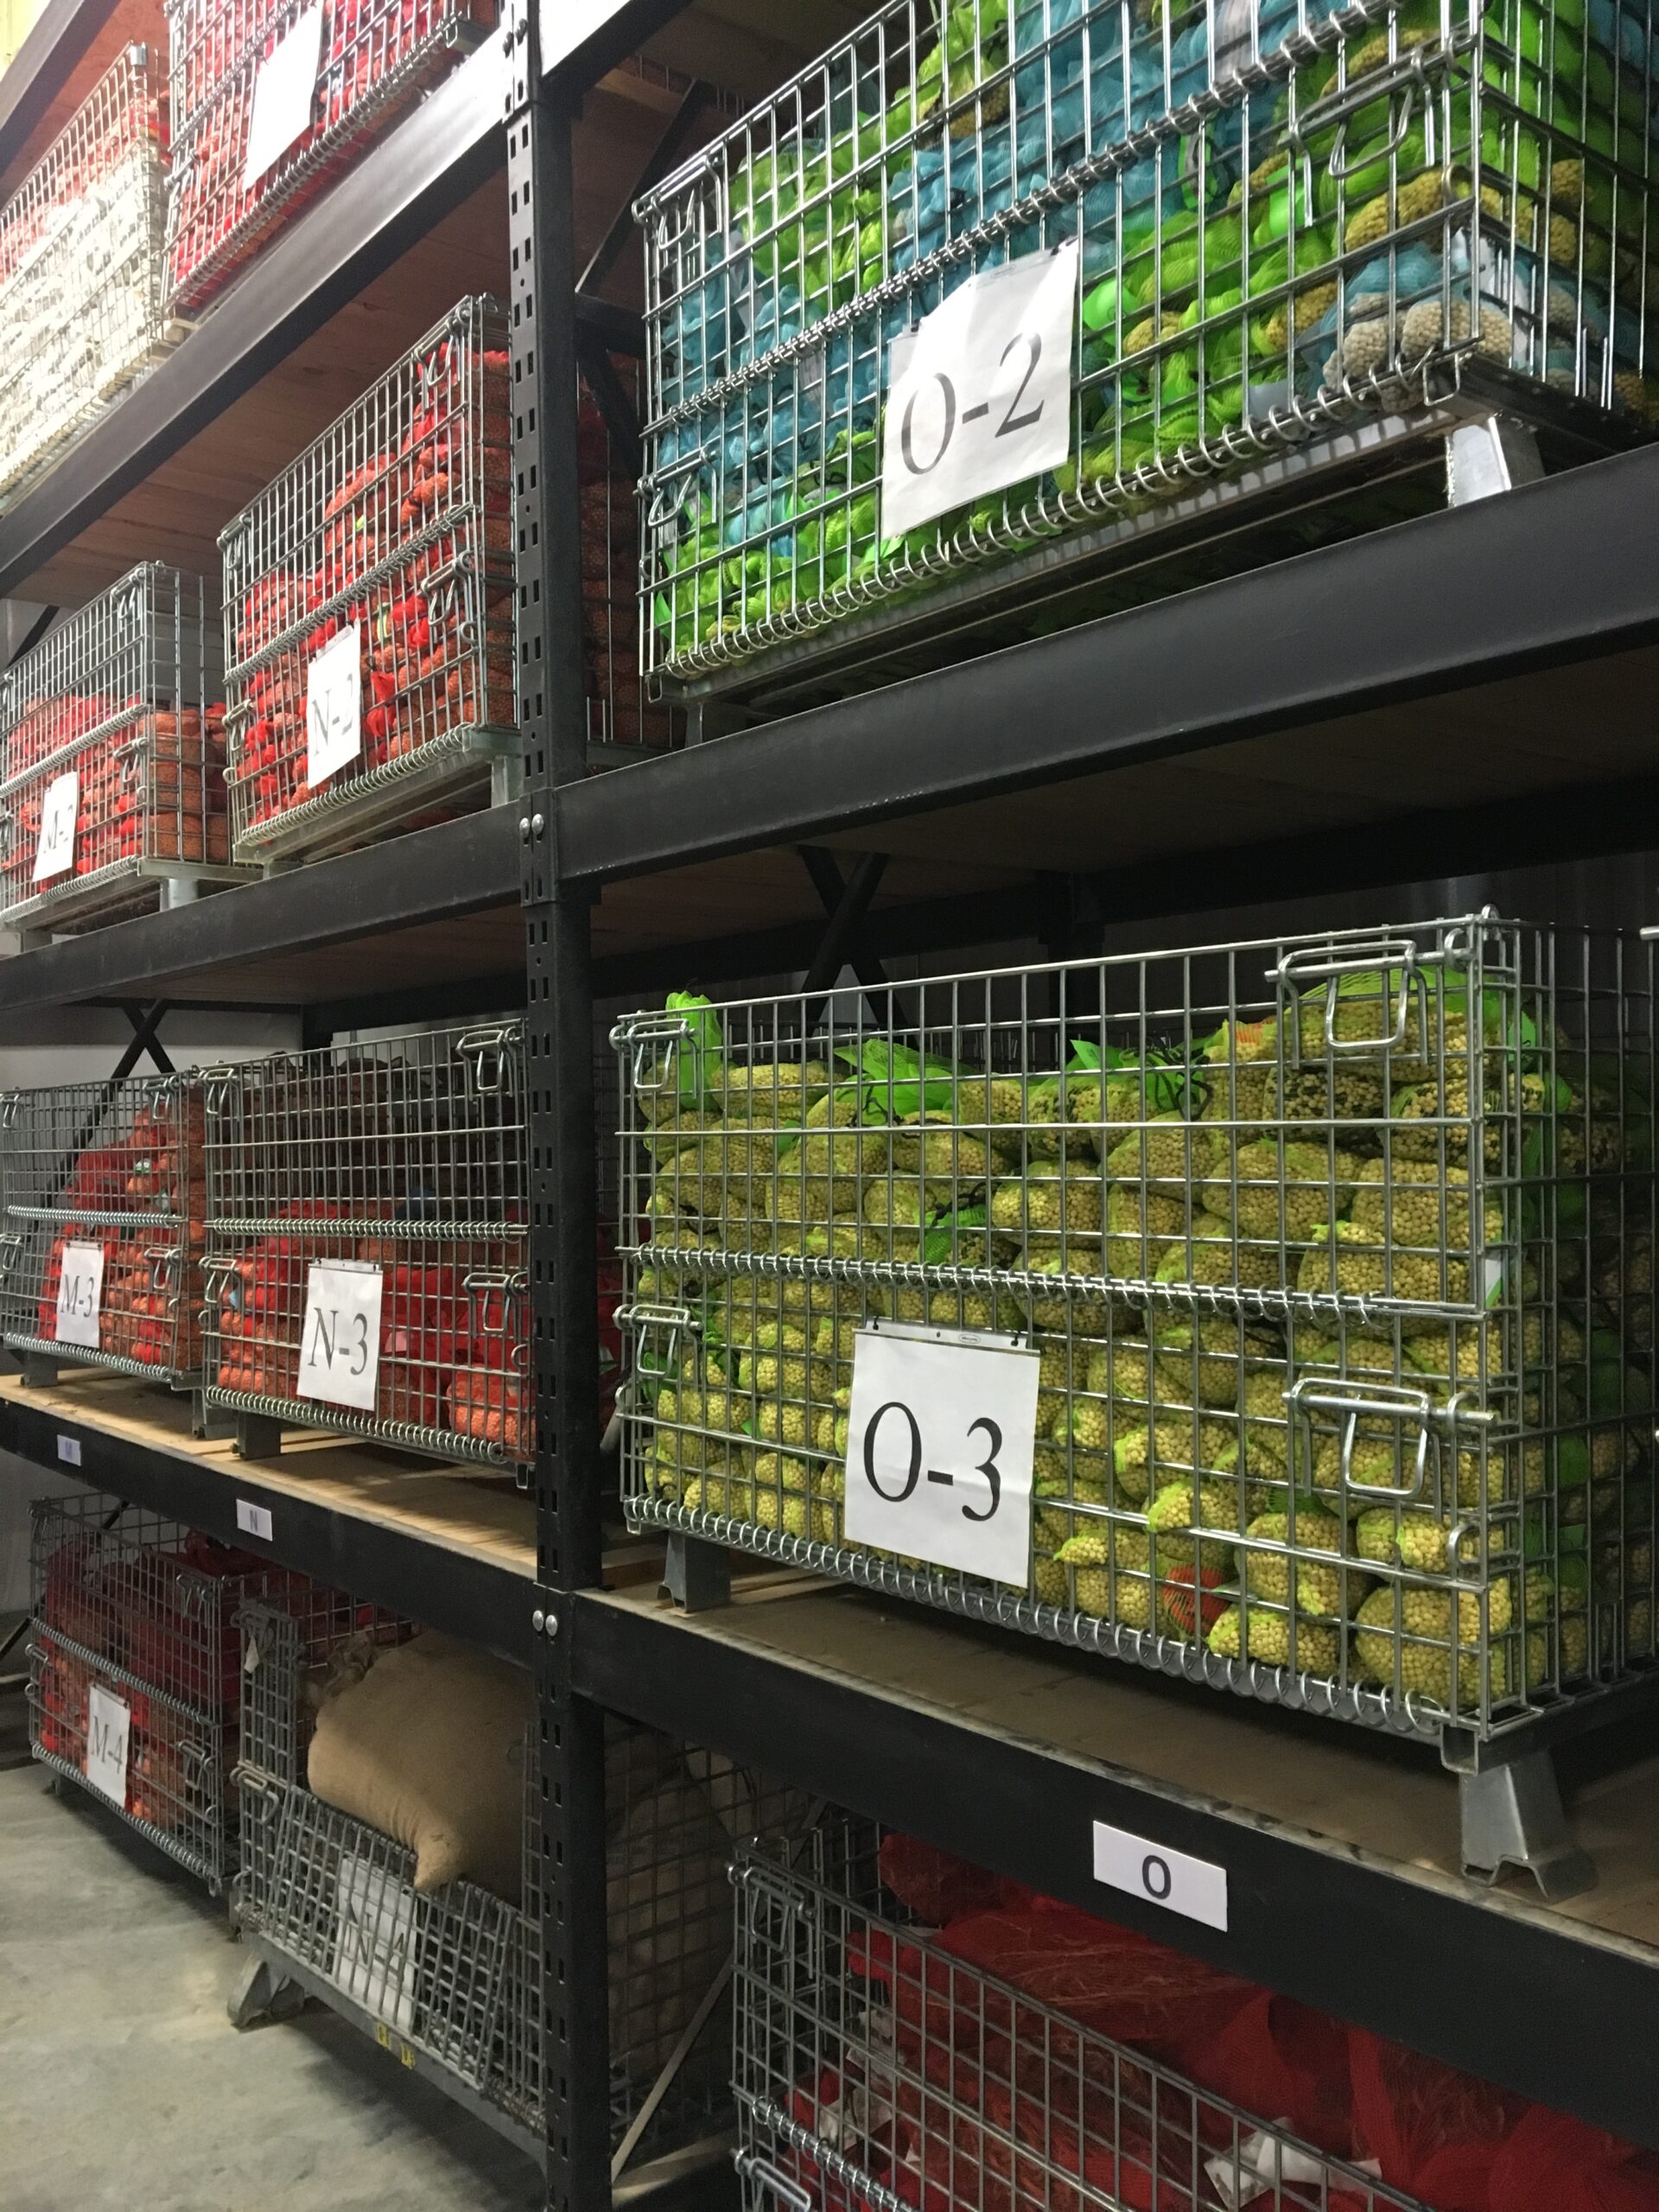 Labeled containers stacked on shelves